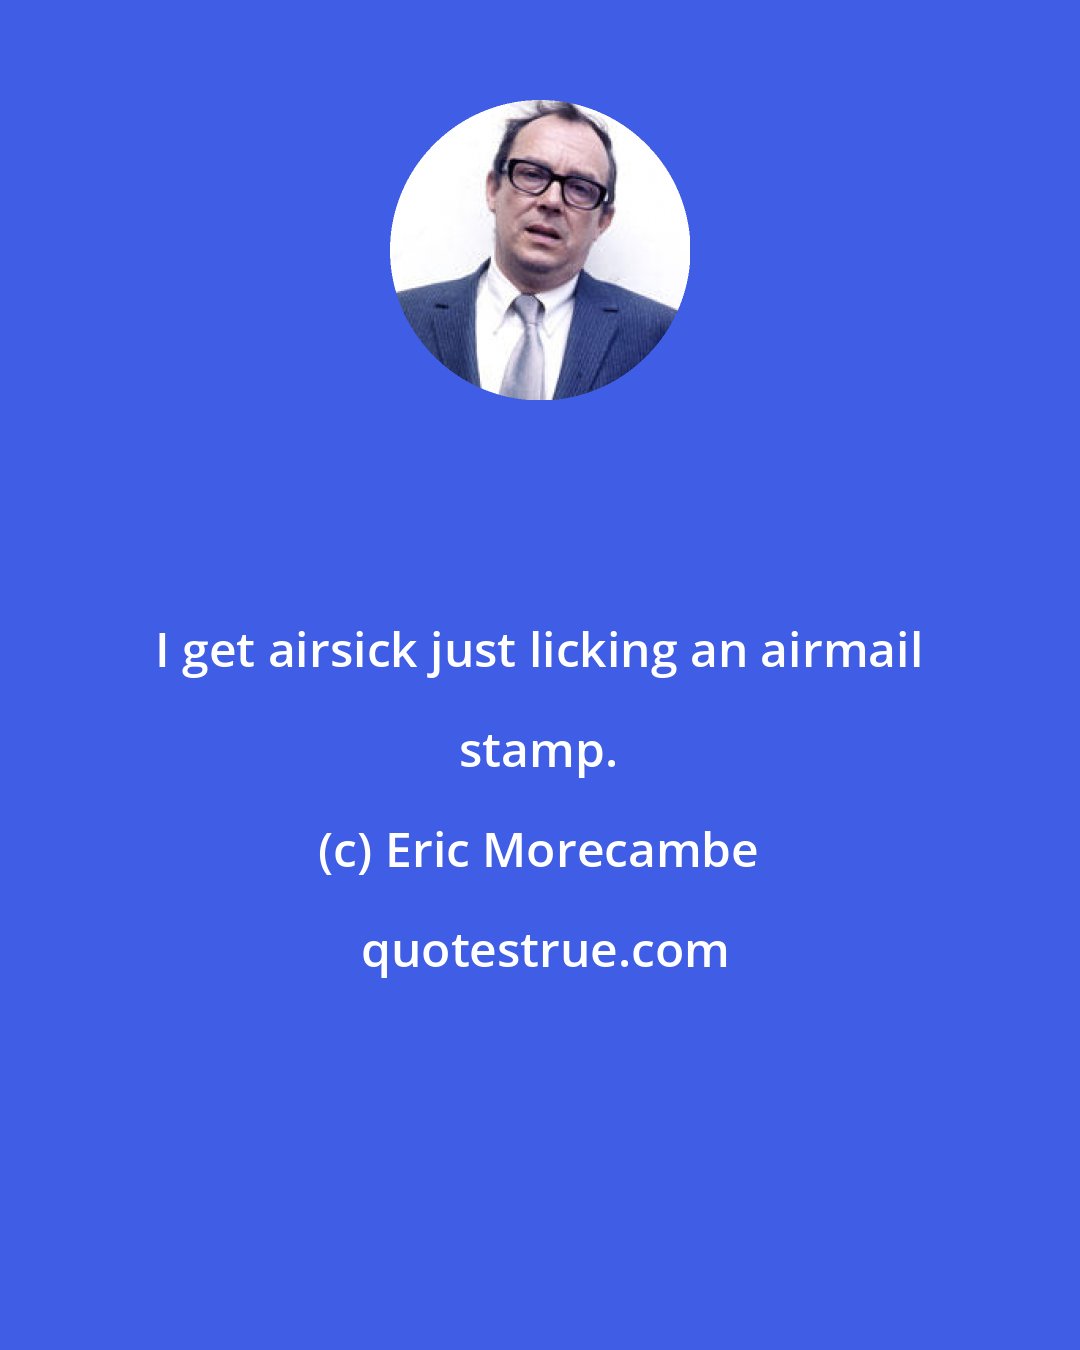 Eric Morecambe: I get airsick just licking an airmail stamp.